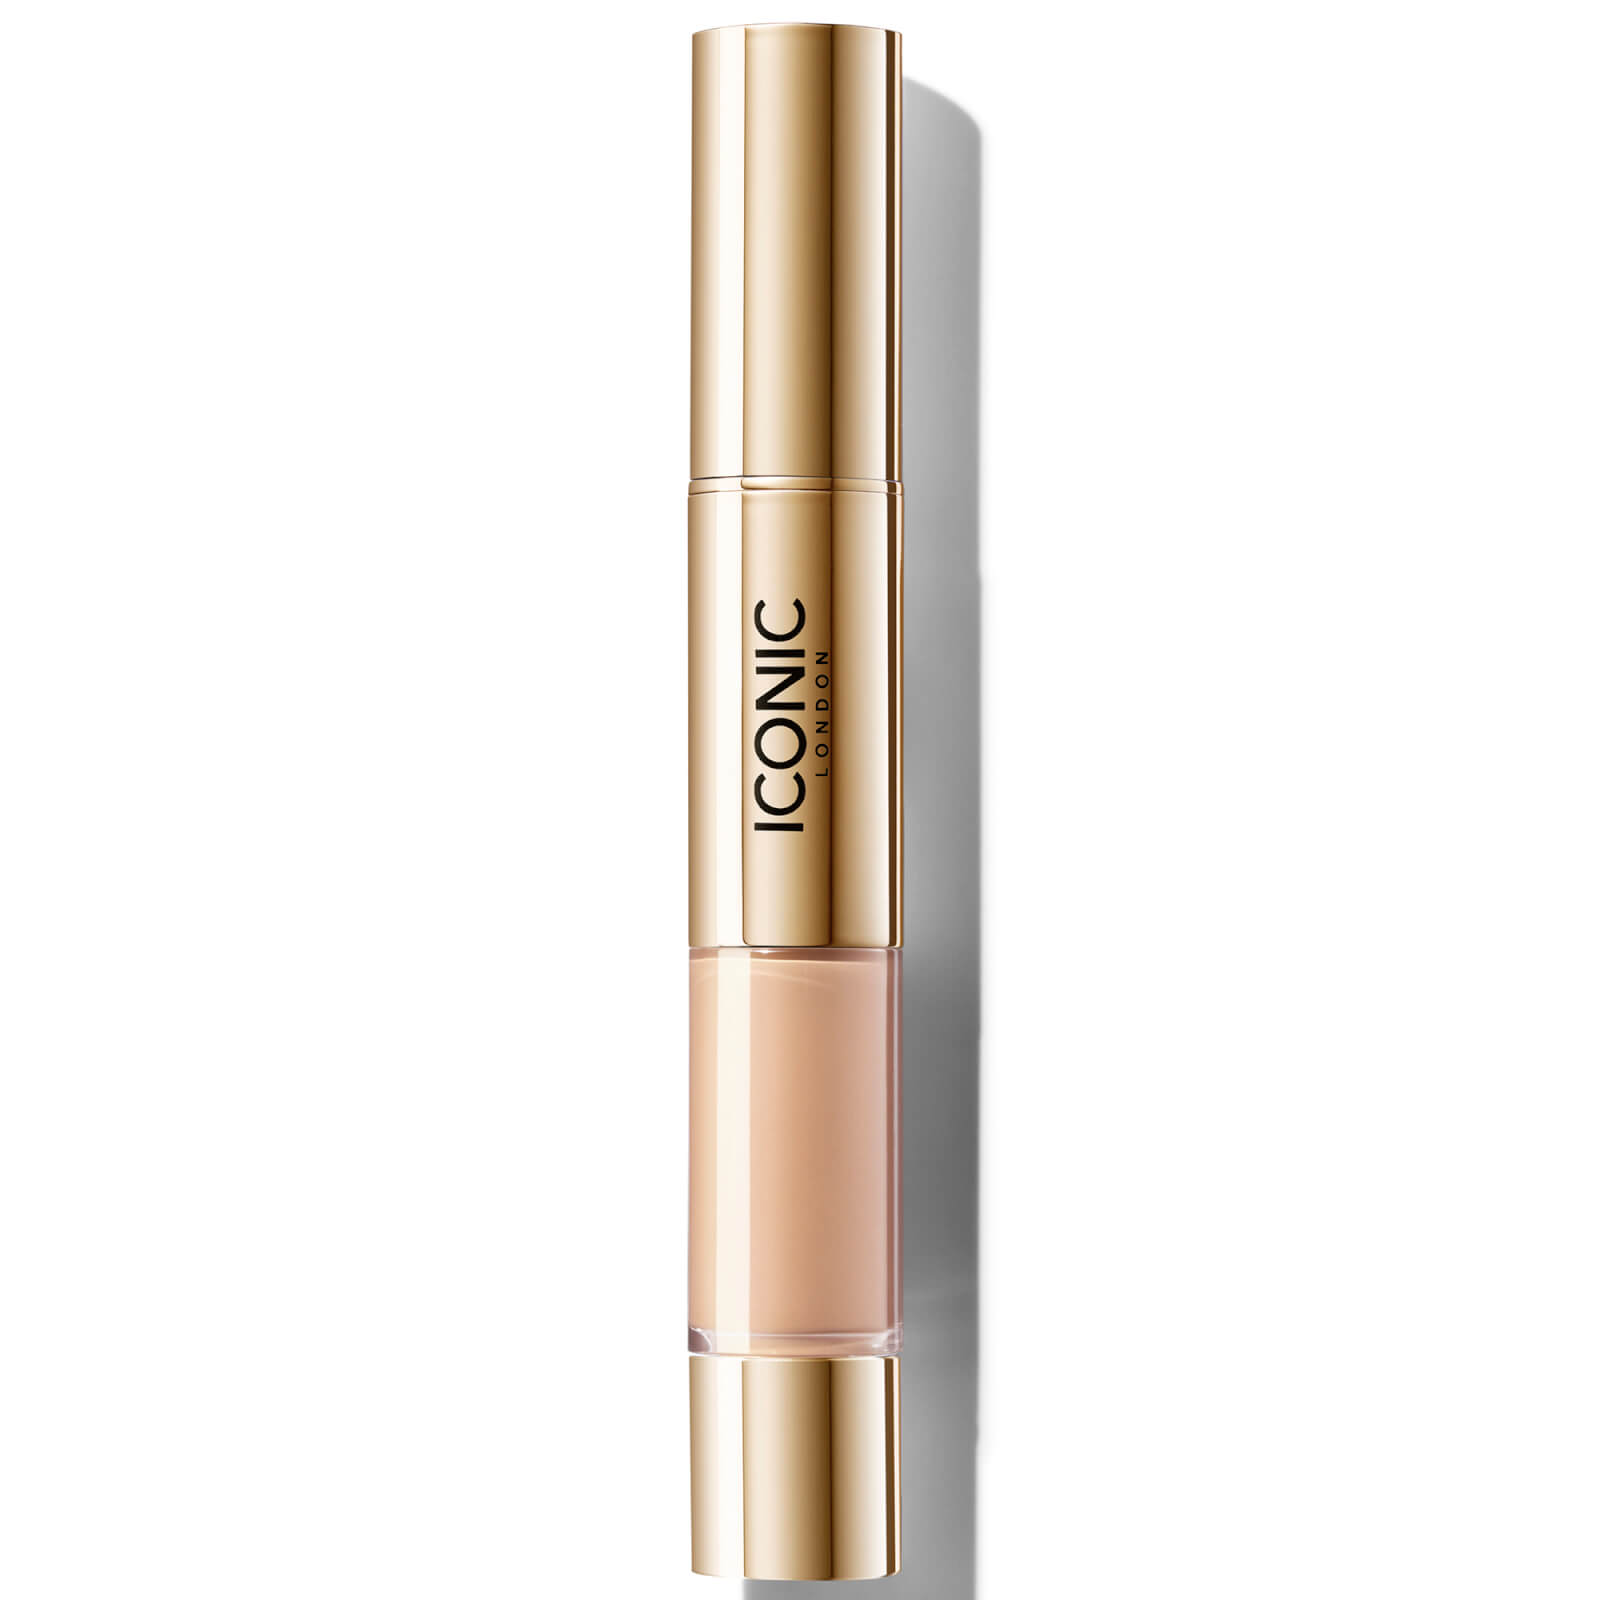 ICONIC London Radiant Concealer and Brightening Duo - Warm Fair von ICONIC London